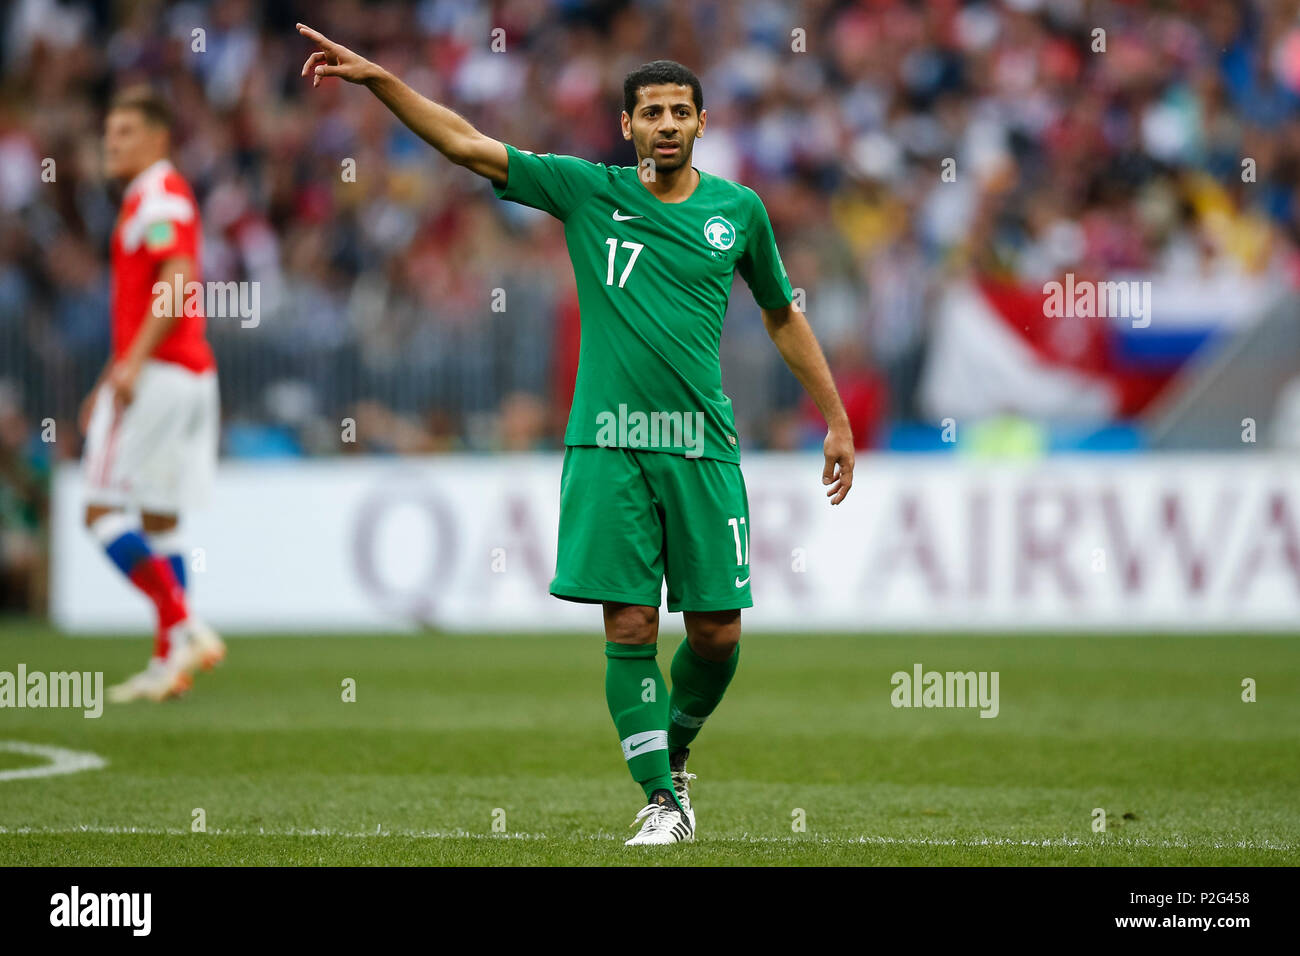 Moscow, Russia. 14th June 2018. Taisir Al-Jassim of Saudi Arabia during the 2018 FIFA World Cup Group A match between Russia and Saudi Arabia at Luzhniki Stadium on June 14th 2018 in Moscow, Russia. Credit: PHC Images/Alamy Live News Stock Photo